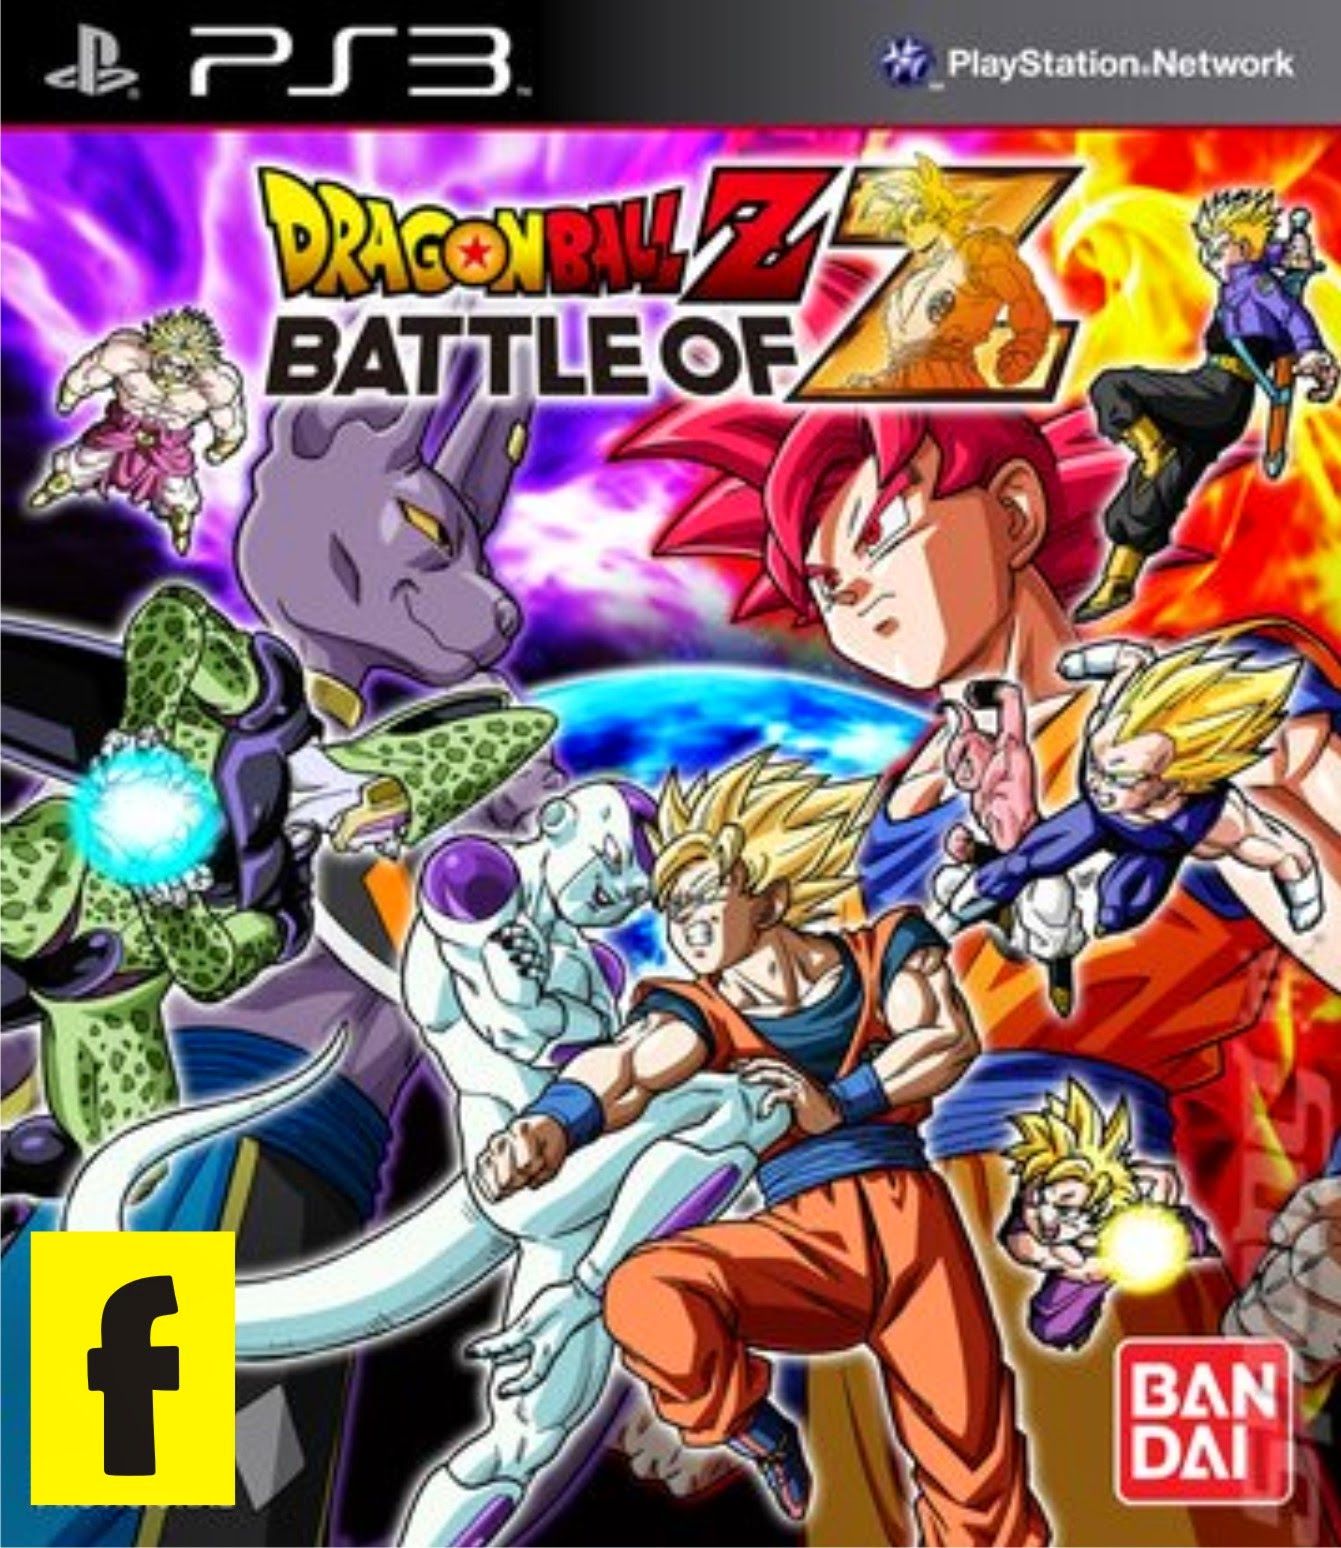 Dragon ball z battle of z xbox 360 iso download